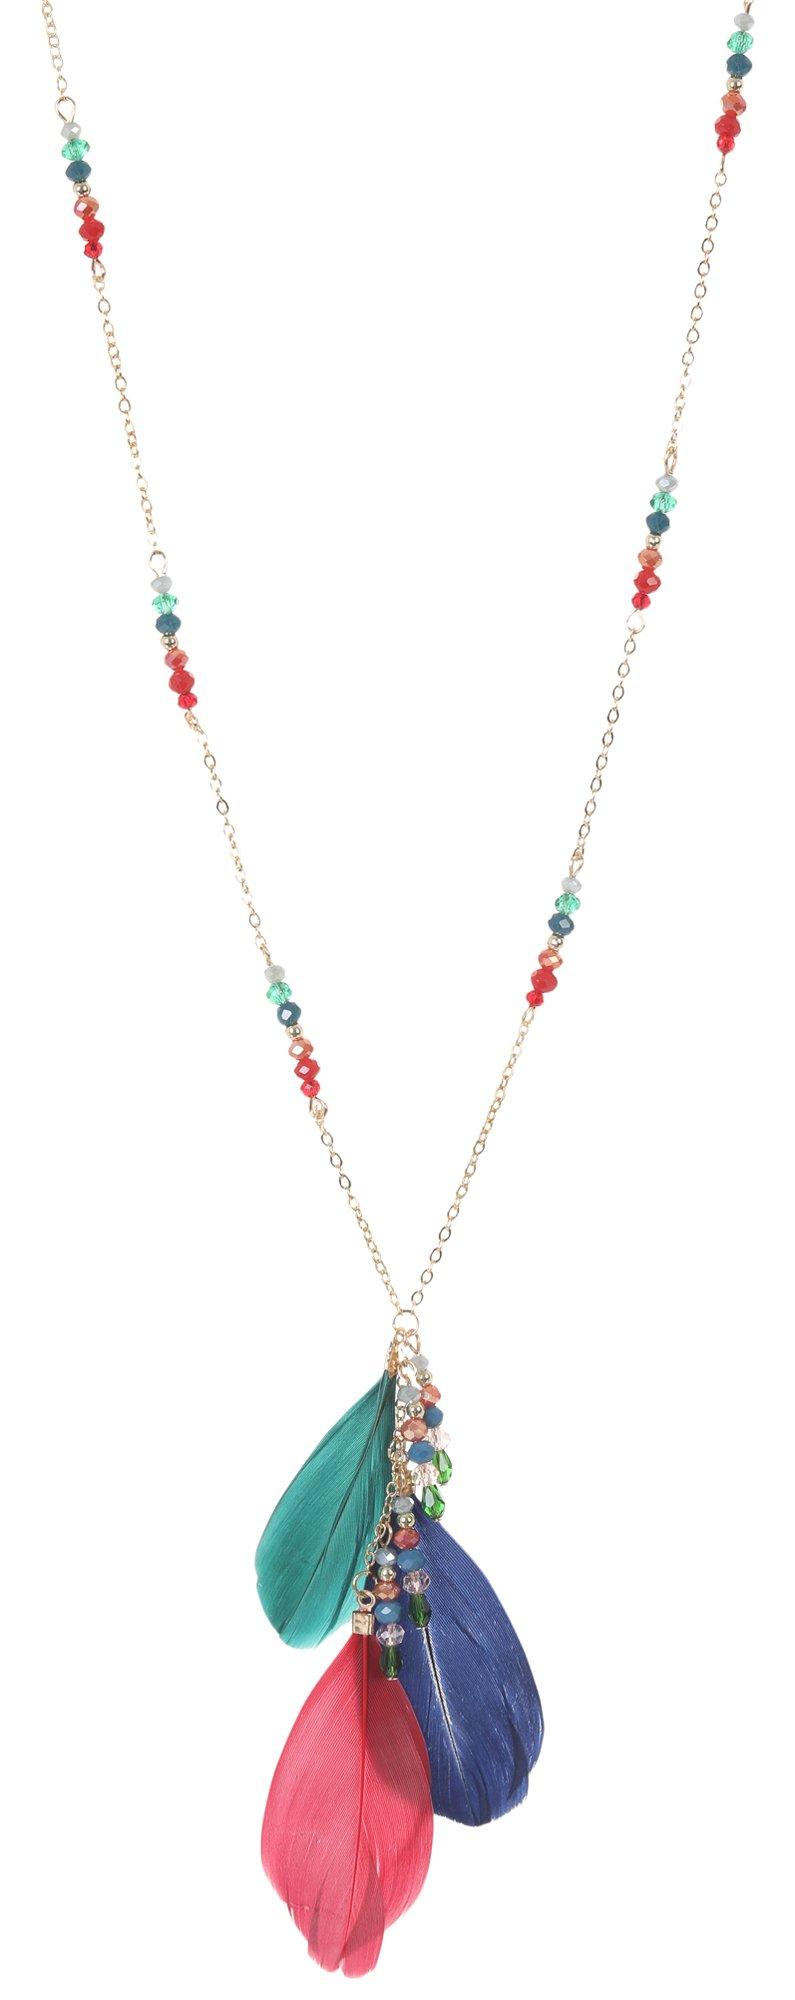 40 In. Bead & Feather Necklace